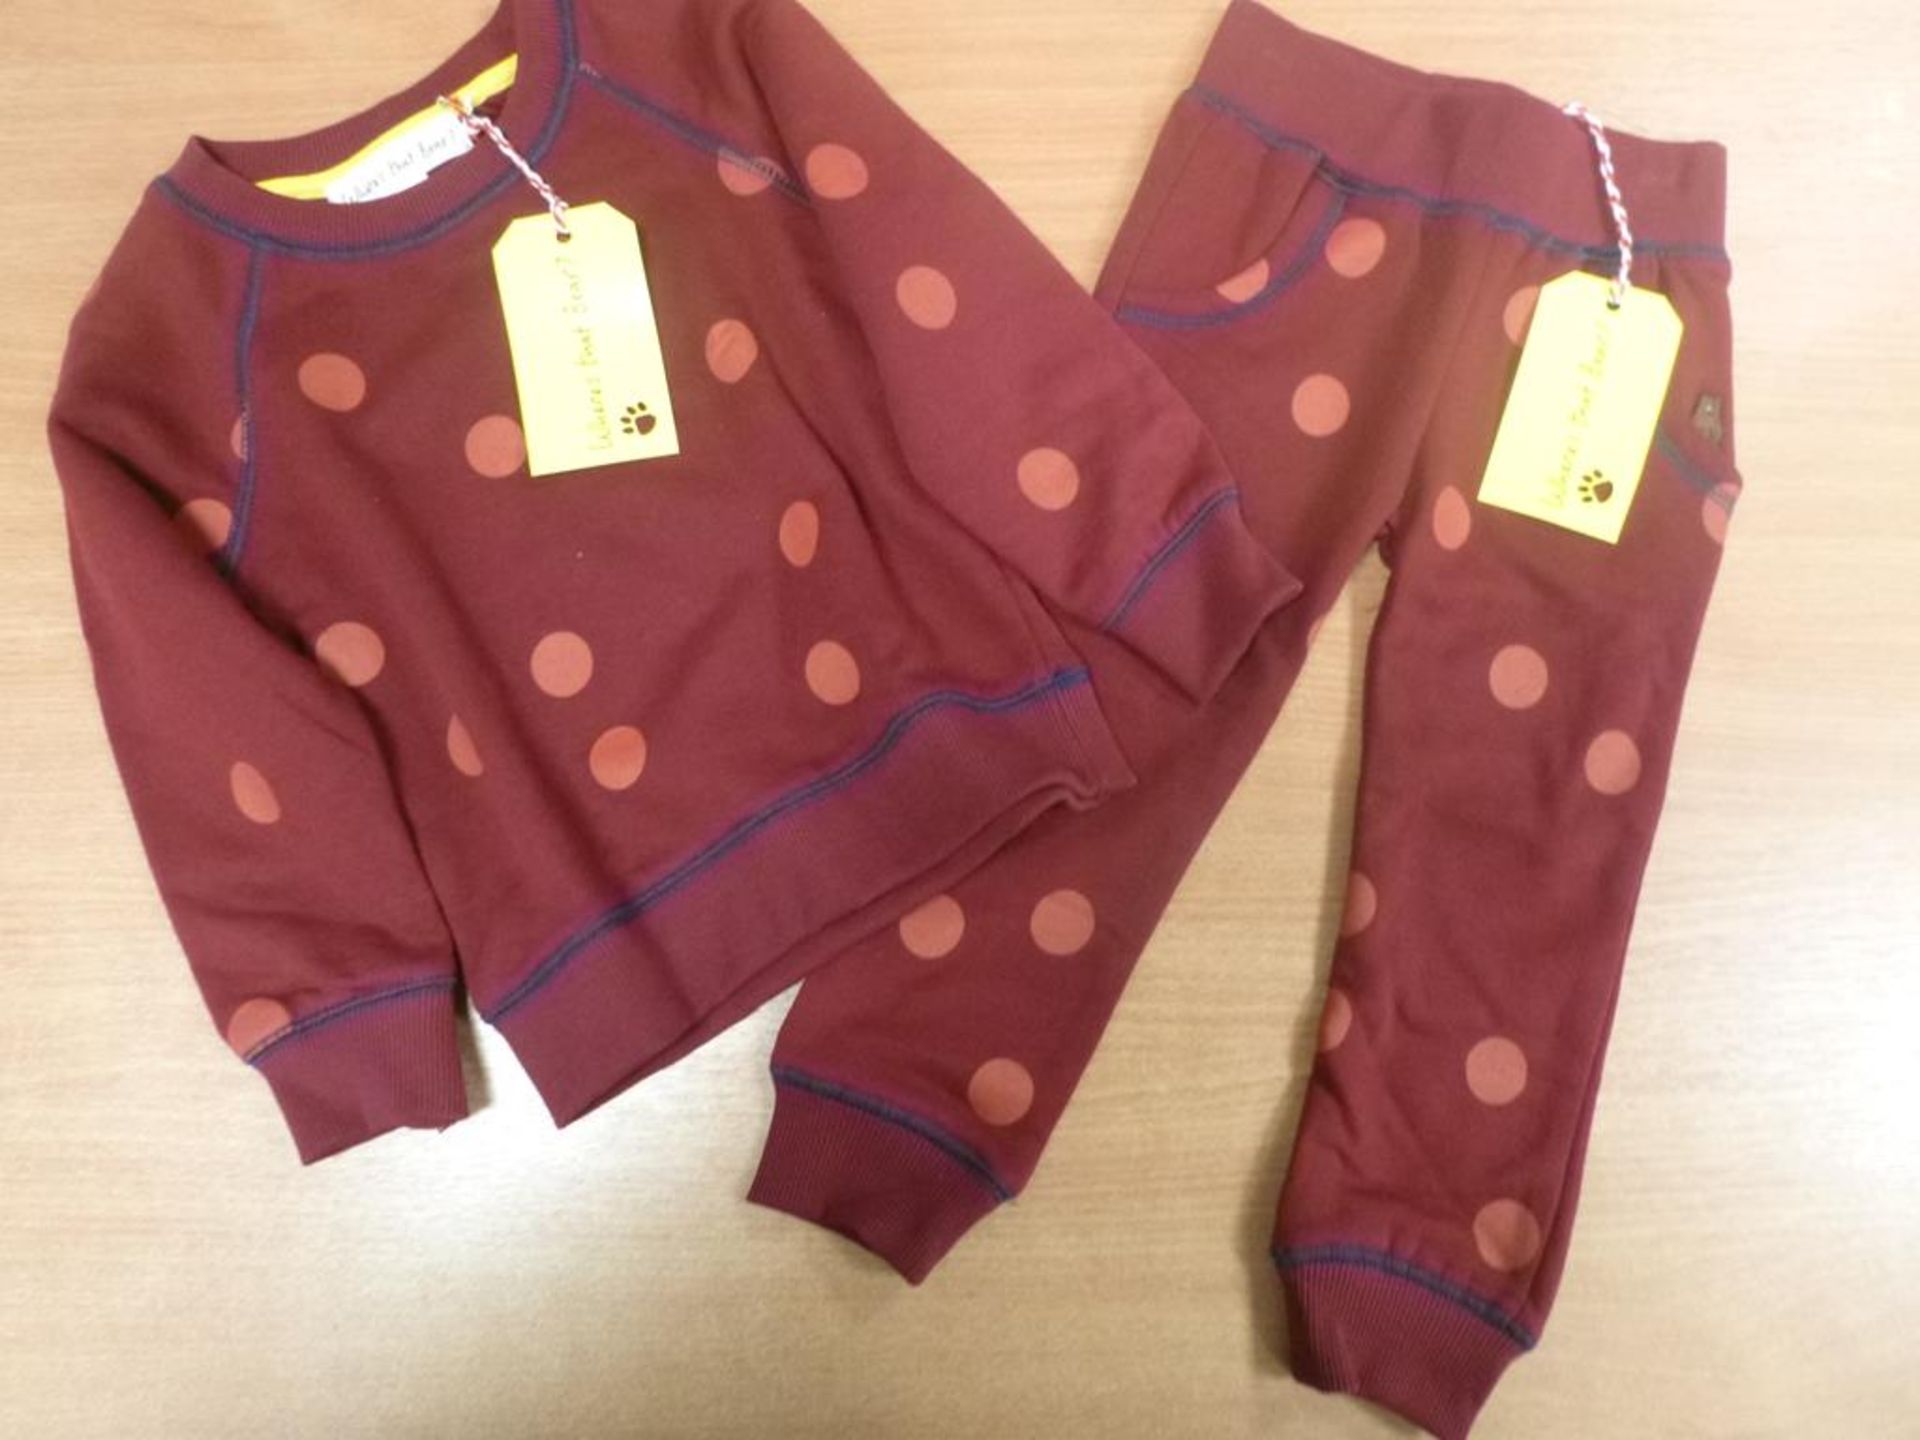 A quantity of Joggers in Dark Berry by 'Where's that Bear' and 6 x Matching Sweaters, sizes 1-2yrs -